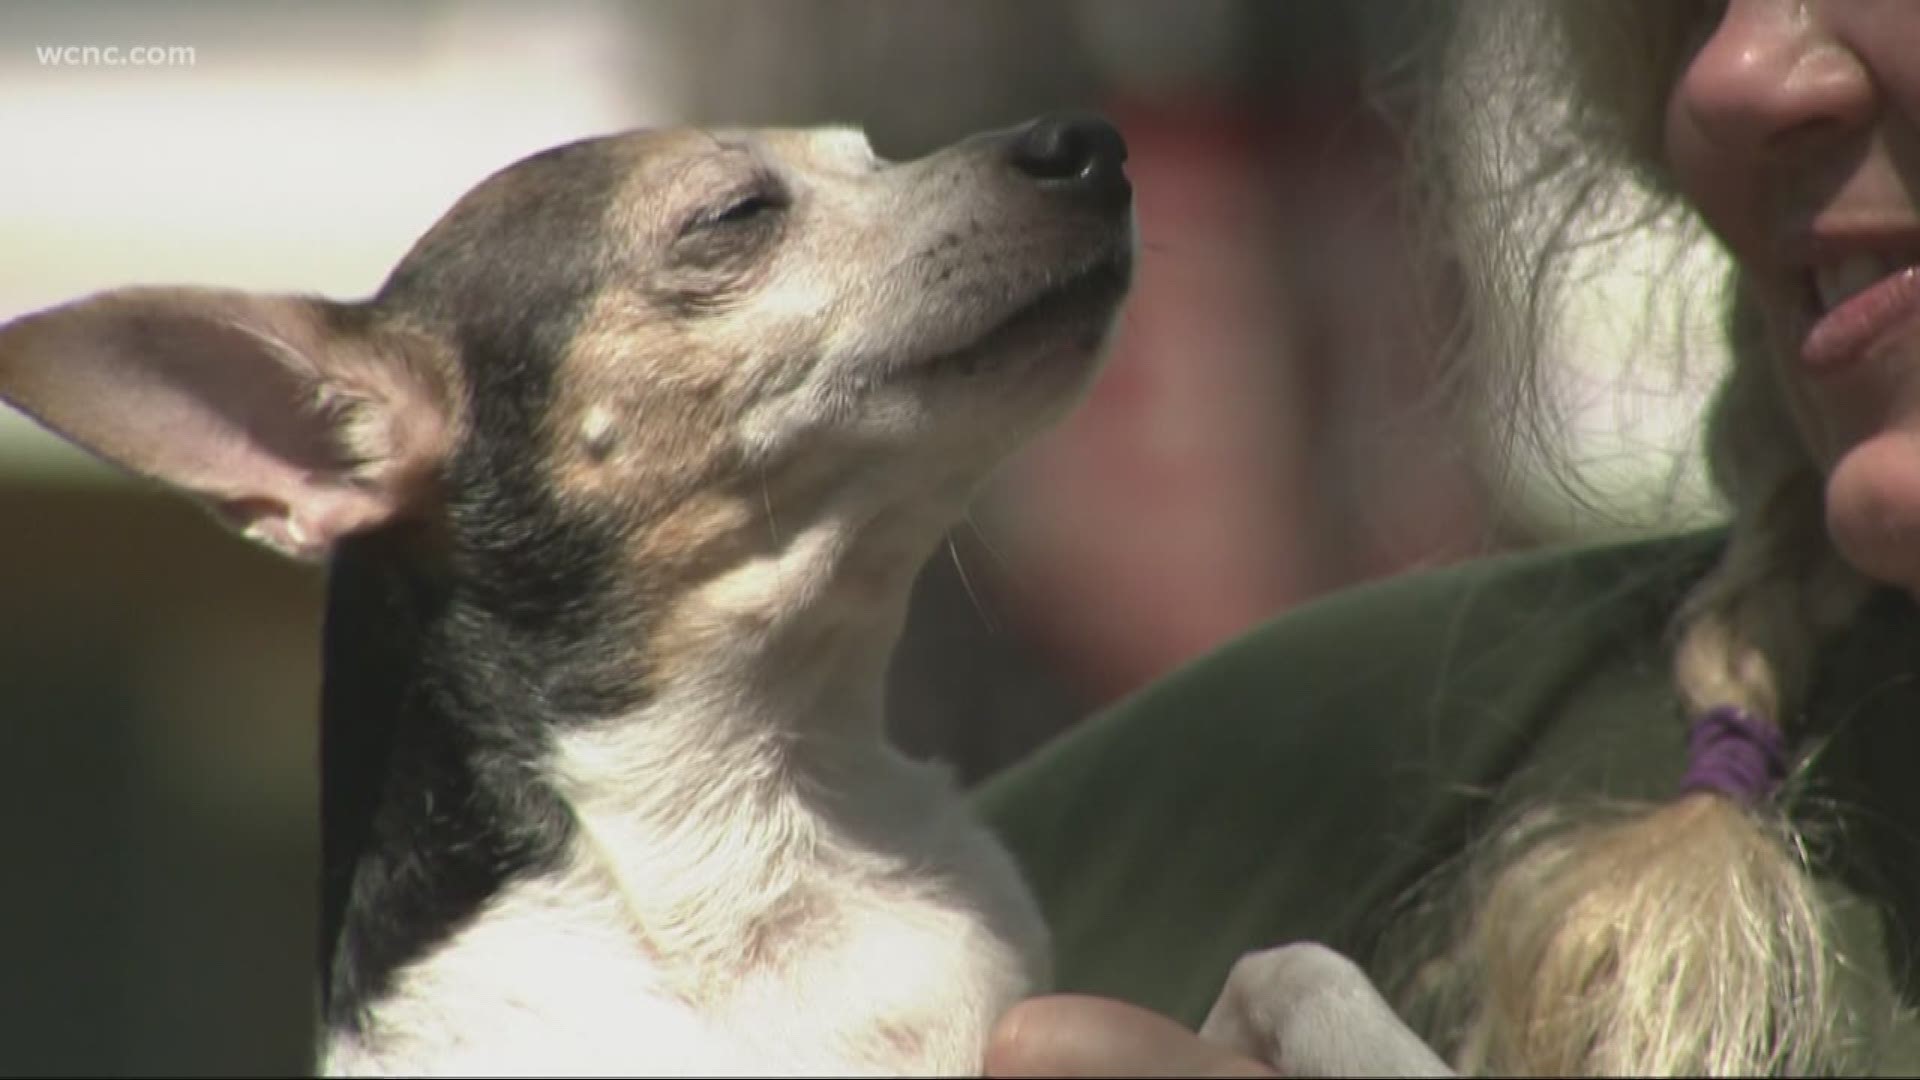 A 14-year-old dog is being hailed a hero after saving its sleeping owner from a house fire